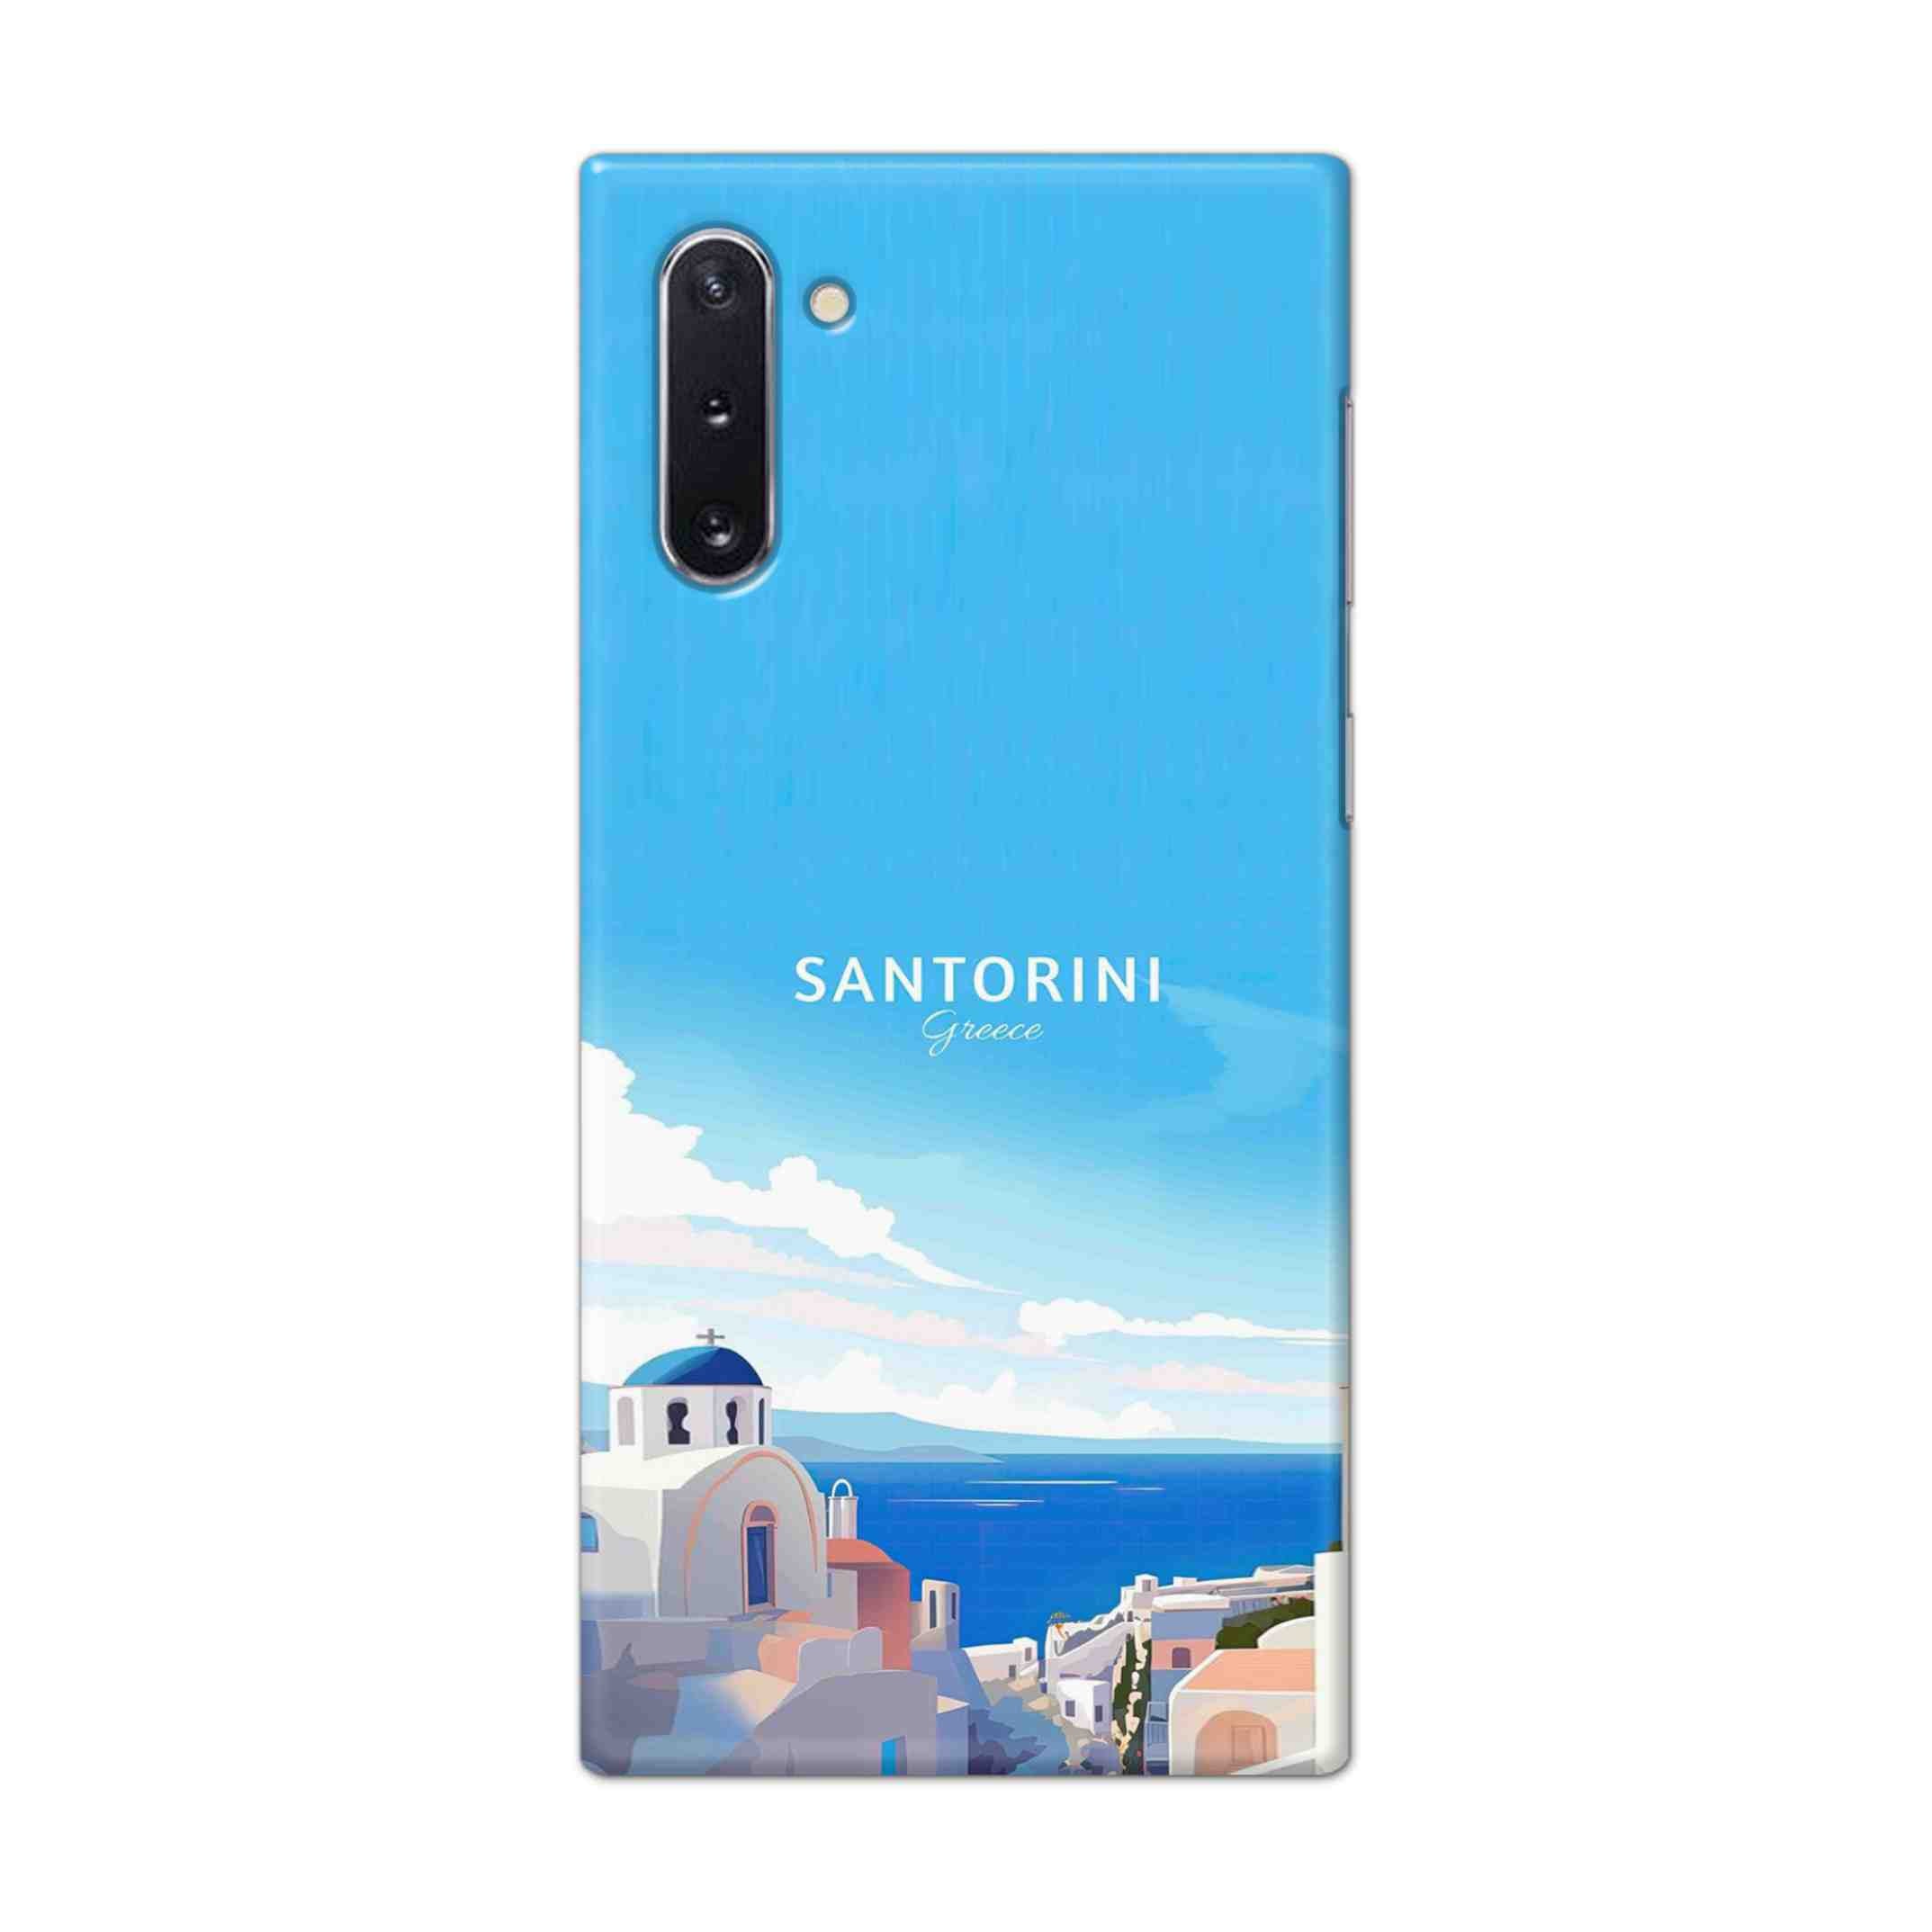 Buy Santorini Hard Back Mobile Phone Case Cover For Samsung Galaxy Note 10 Online